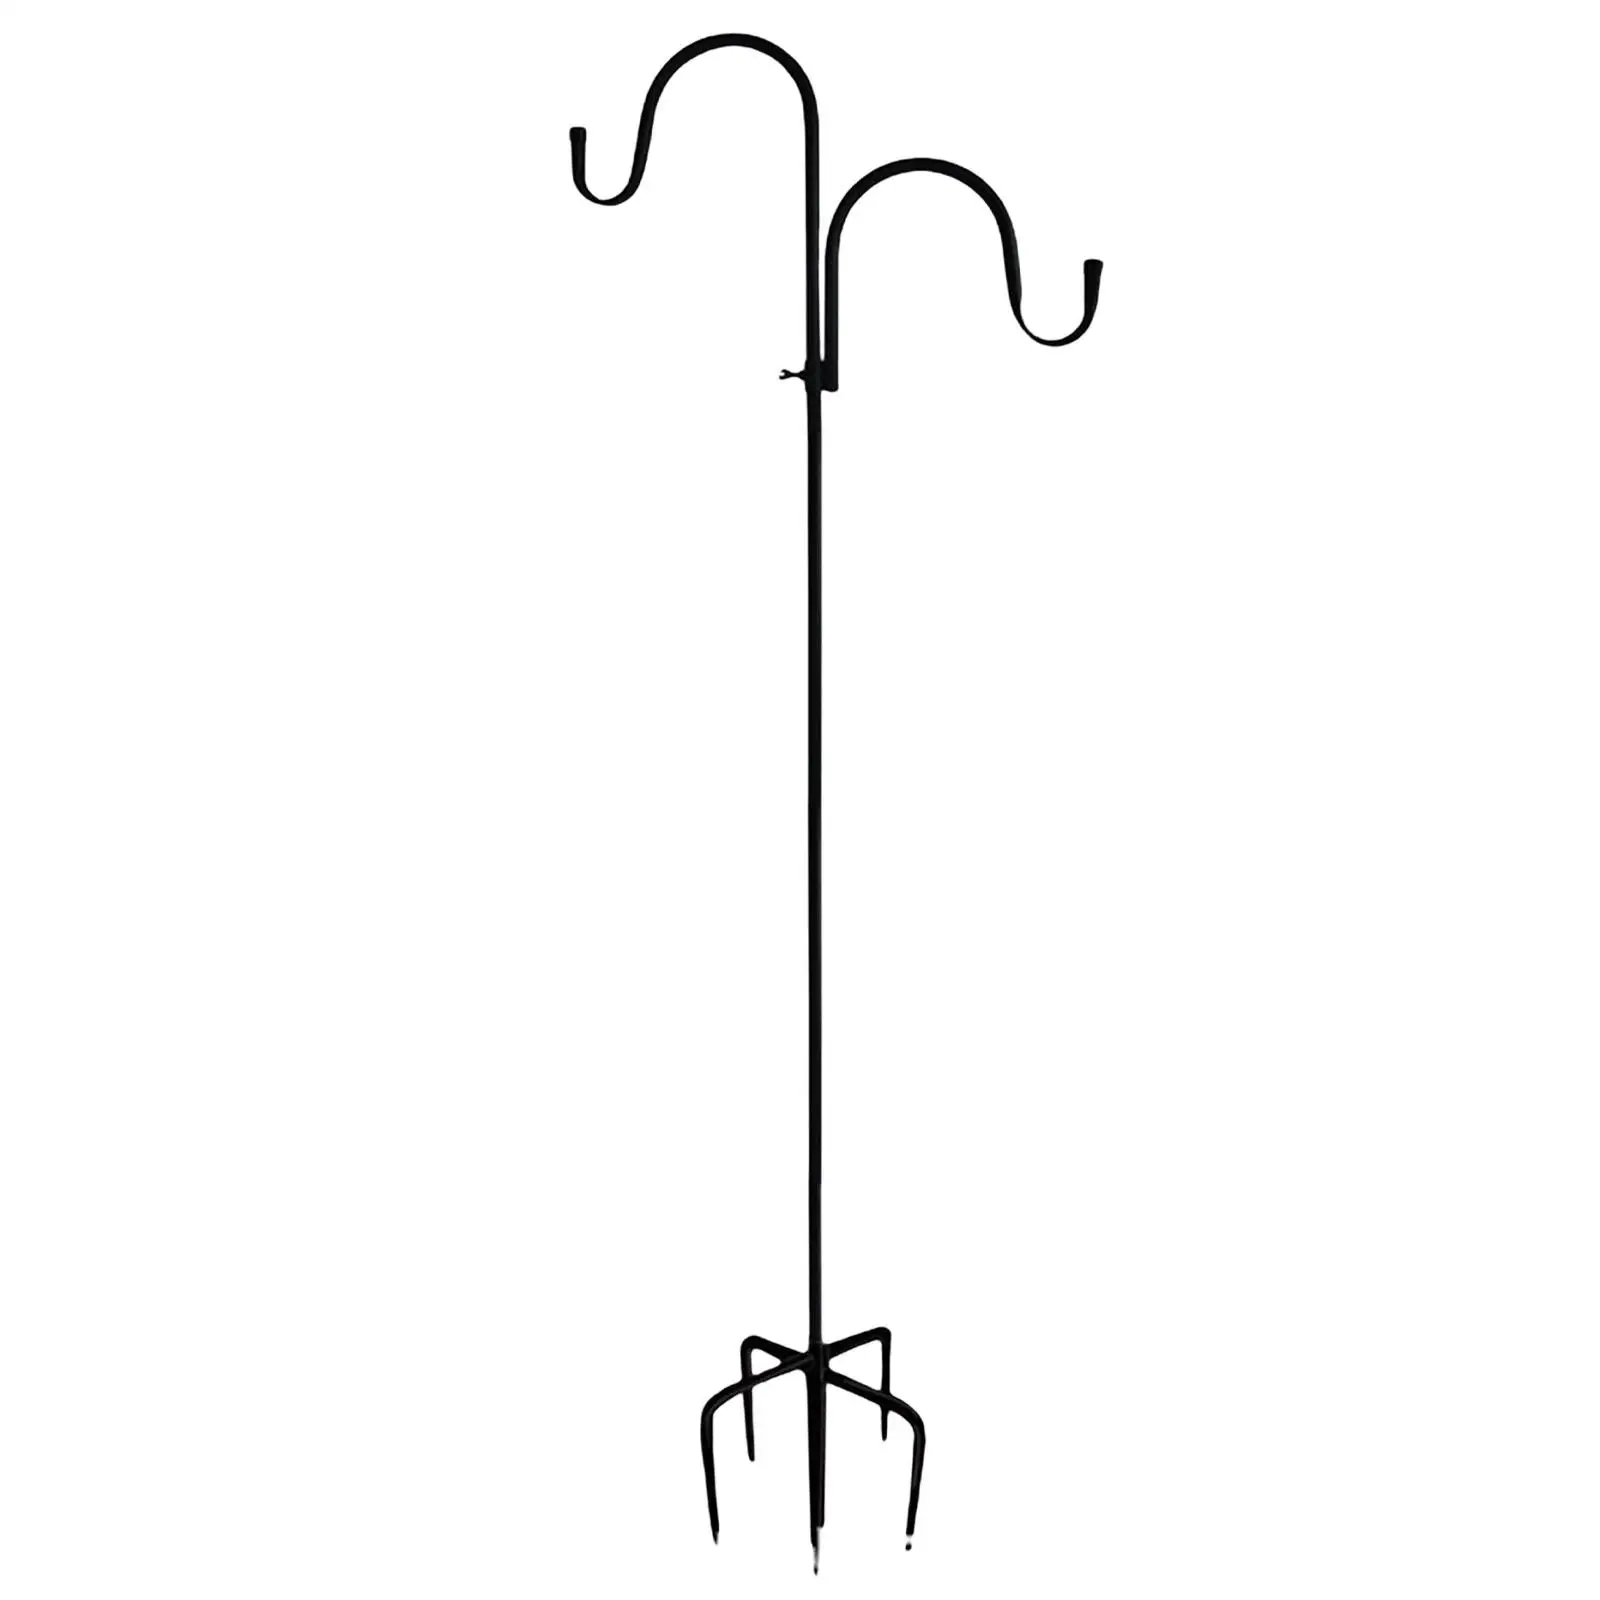 Shepherd Hooks Garden Ground Plant Stand with Hook with Five Prong Base for Holder Flower Pot